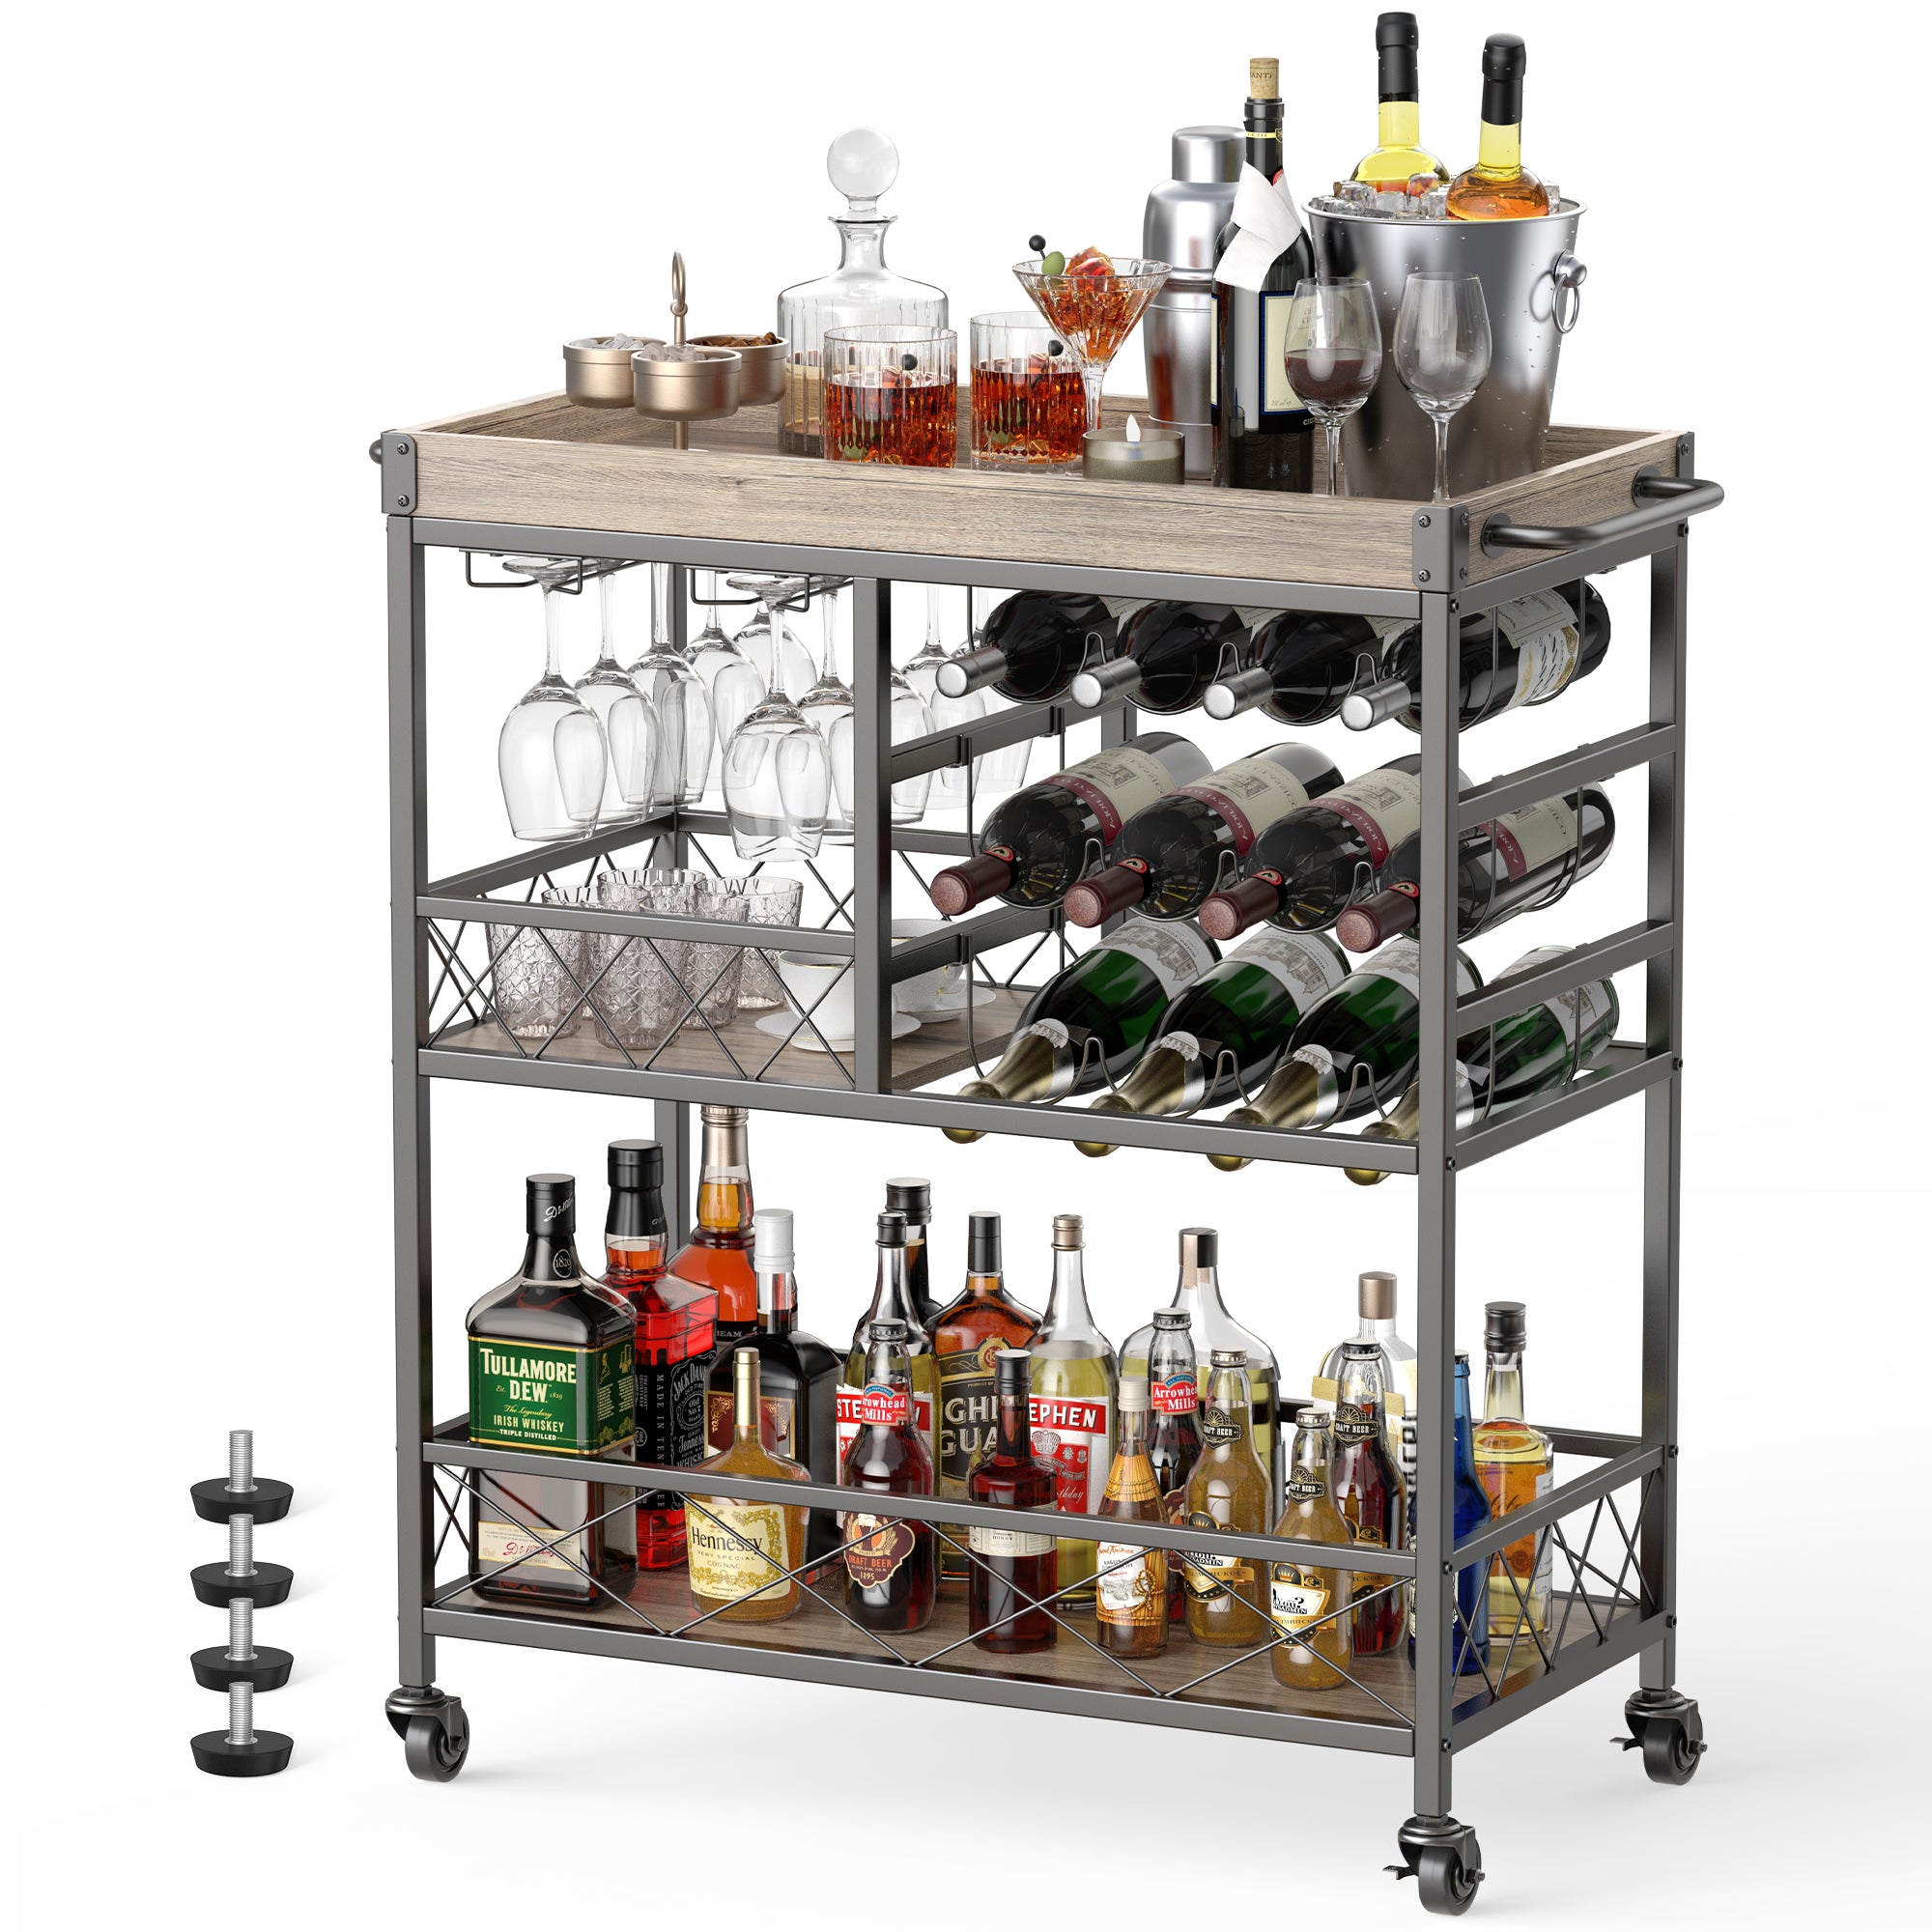 Gizoon AK40 Home Bar Serving Cart with Large Storage Space and Lockable Wheels